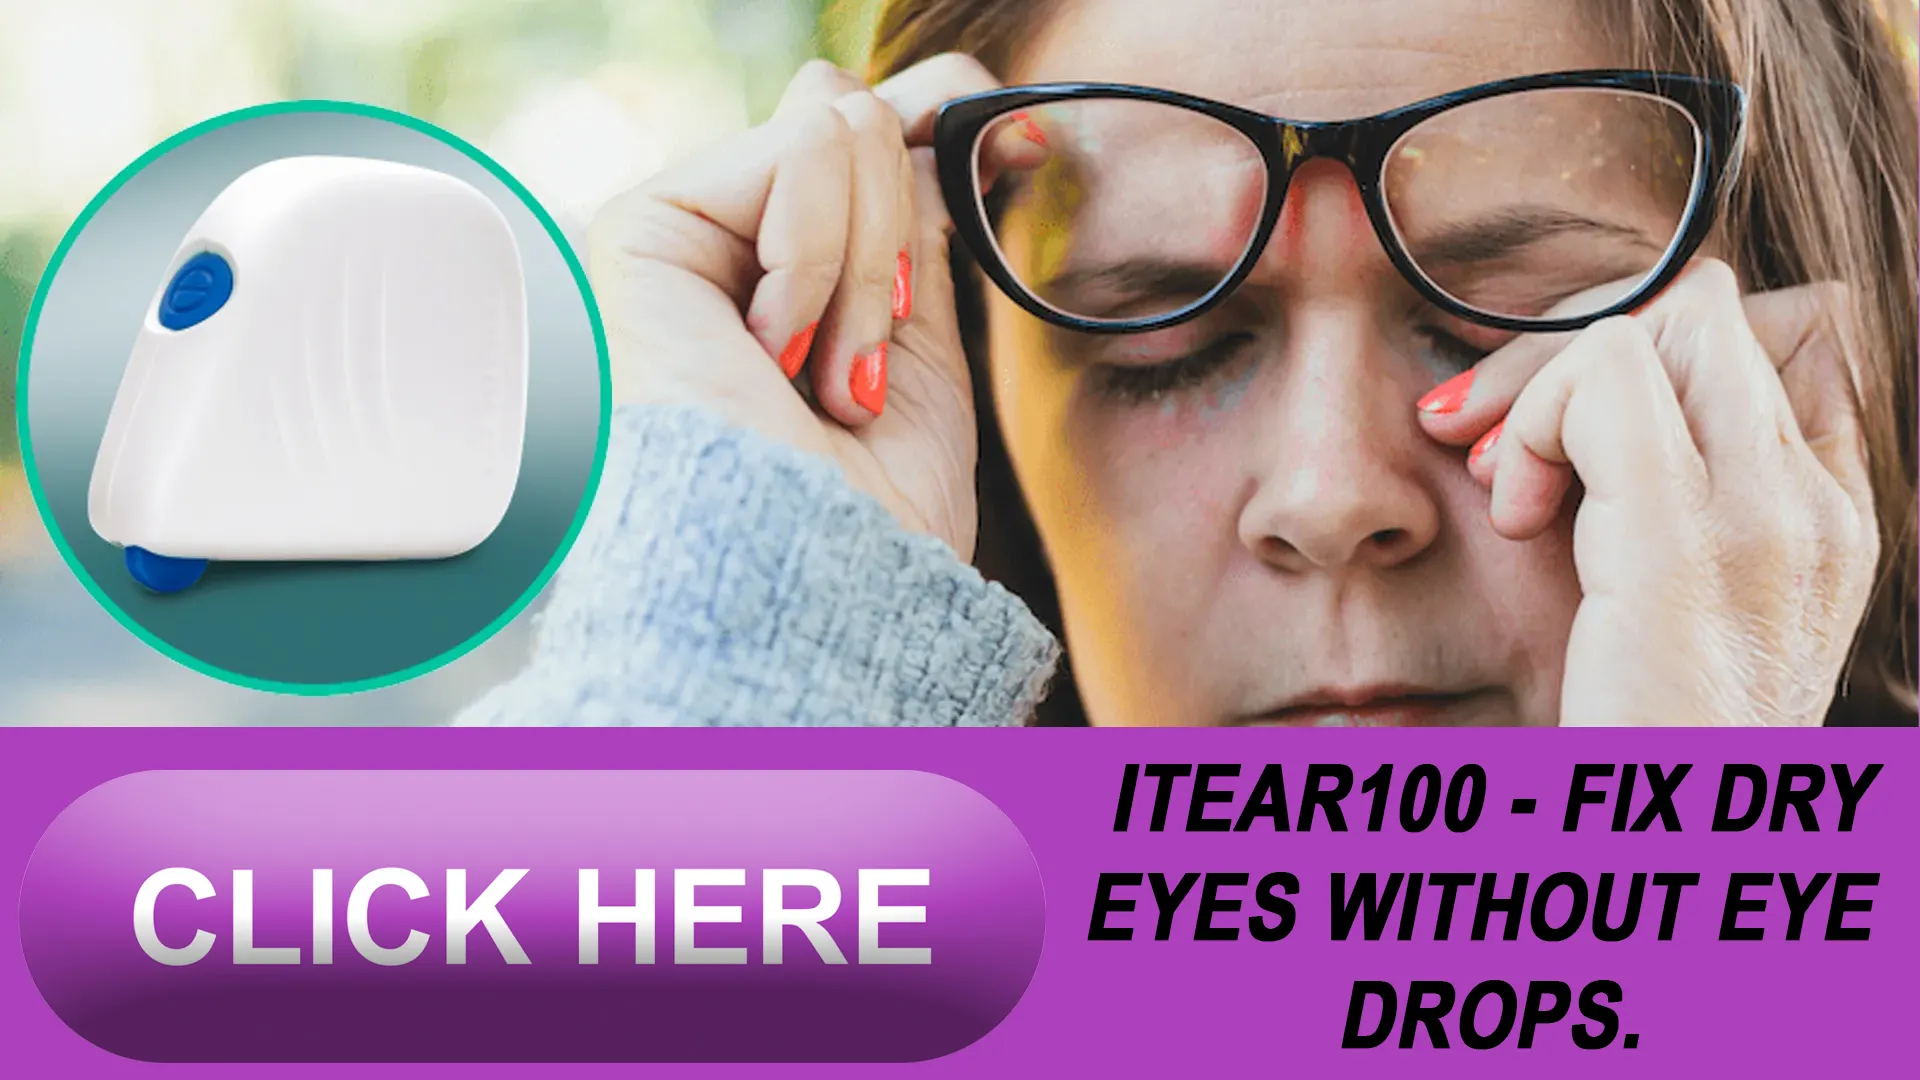 Making the Most of Dry Eye Treatments